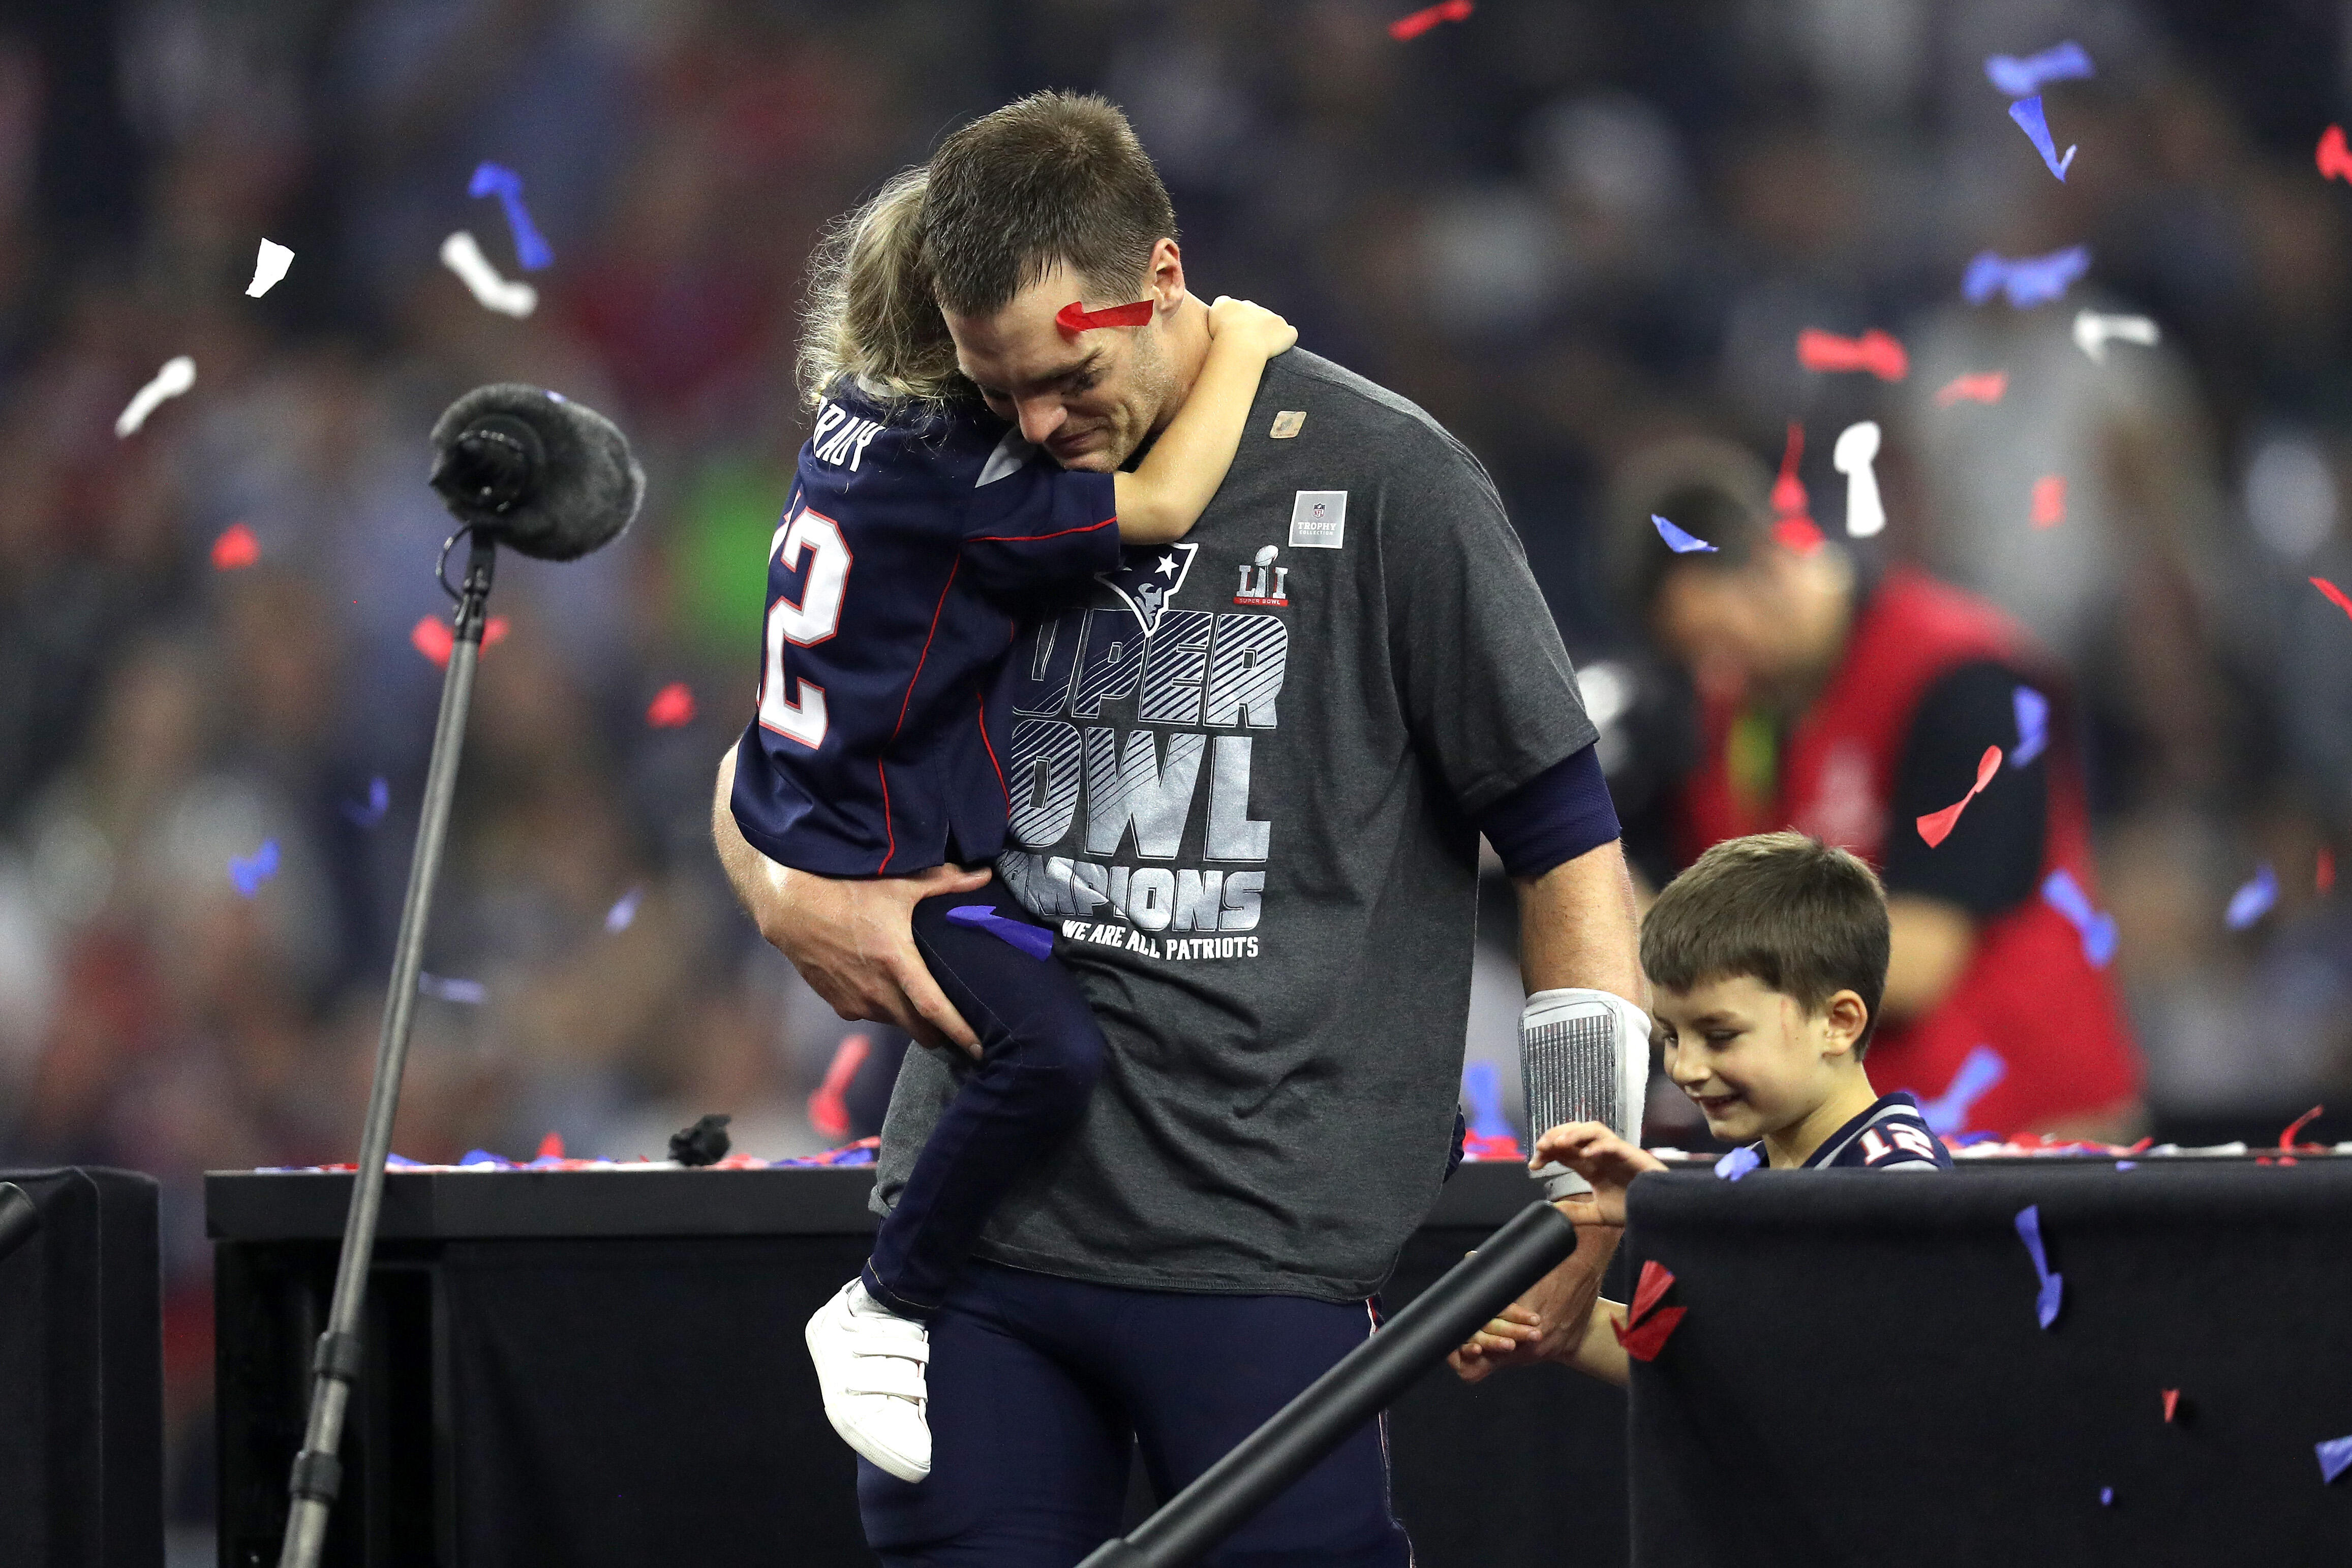 HOUSTON, TX - FEBRUARY 05: Tom Brady #12 of the New England Patriots celebrates with his children after defeating the Atlanta Falcons during Super Bowl 51 at NRG Stadium on February 5, 2017 in Houston, Texas. The Patriots defeated the Falcons 34-28. (Phot